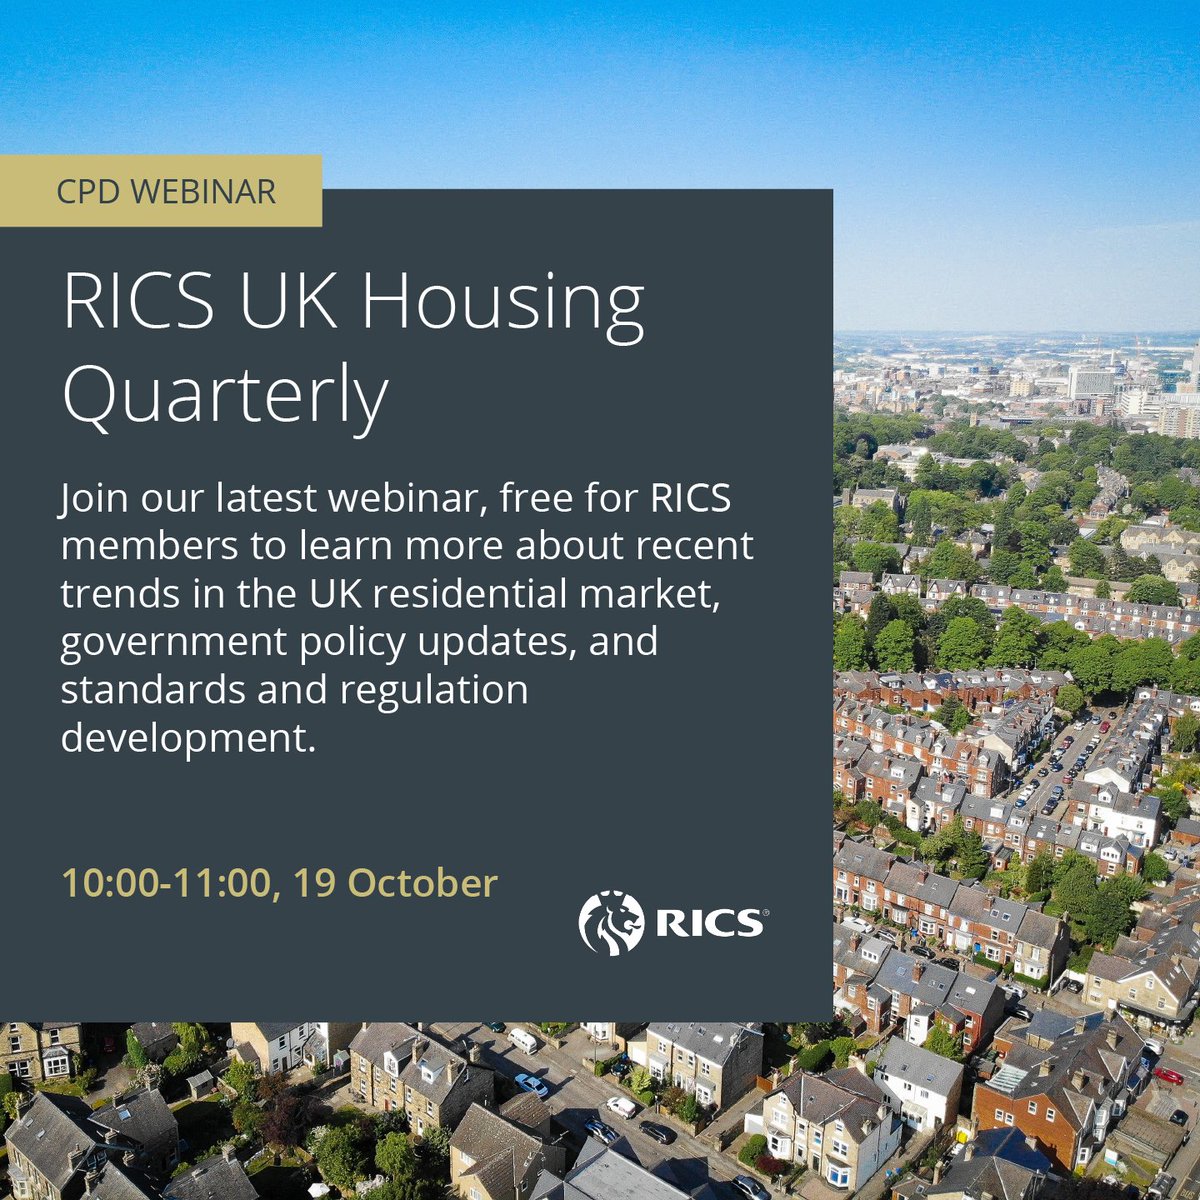 The next edition of the popular RICS UK Housing Quarterly webinar is this Thursday. In the session this week, we will explore the latest consumer trends in housing satisfaction, financing and purchase expectations. Register now: rics.org/training-event…